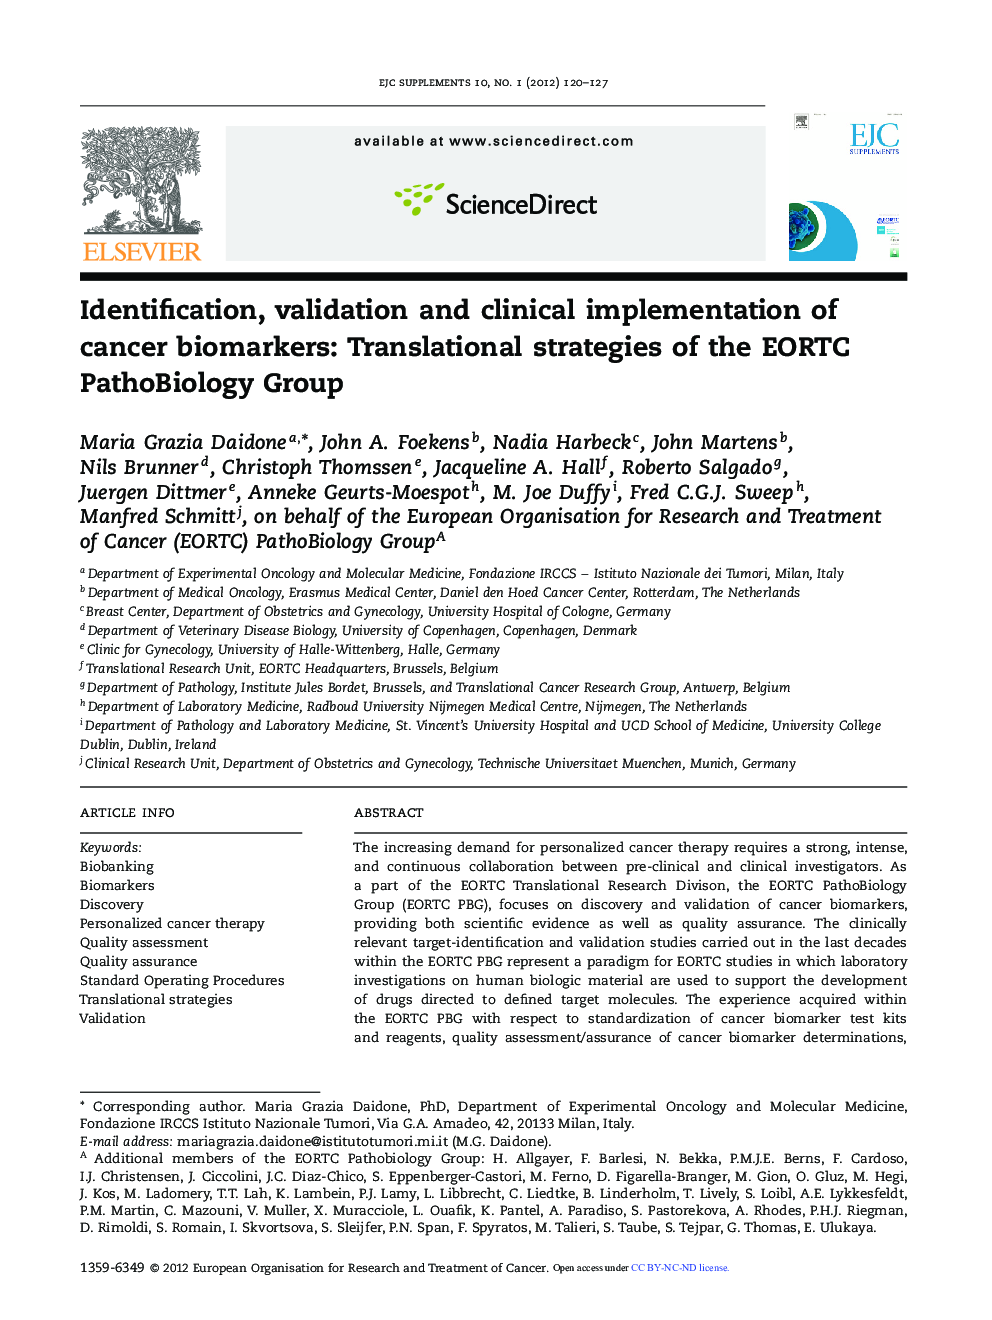 Identification, validation and clinical implementation of cancer biomarkers: Translational strategies of the EORTC PathoBiology Group